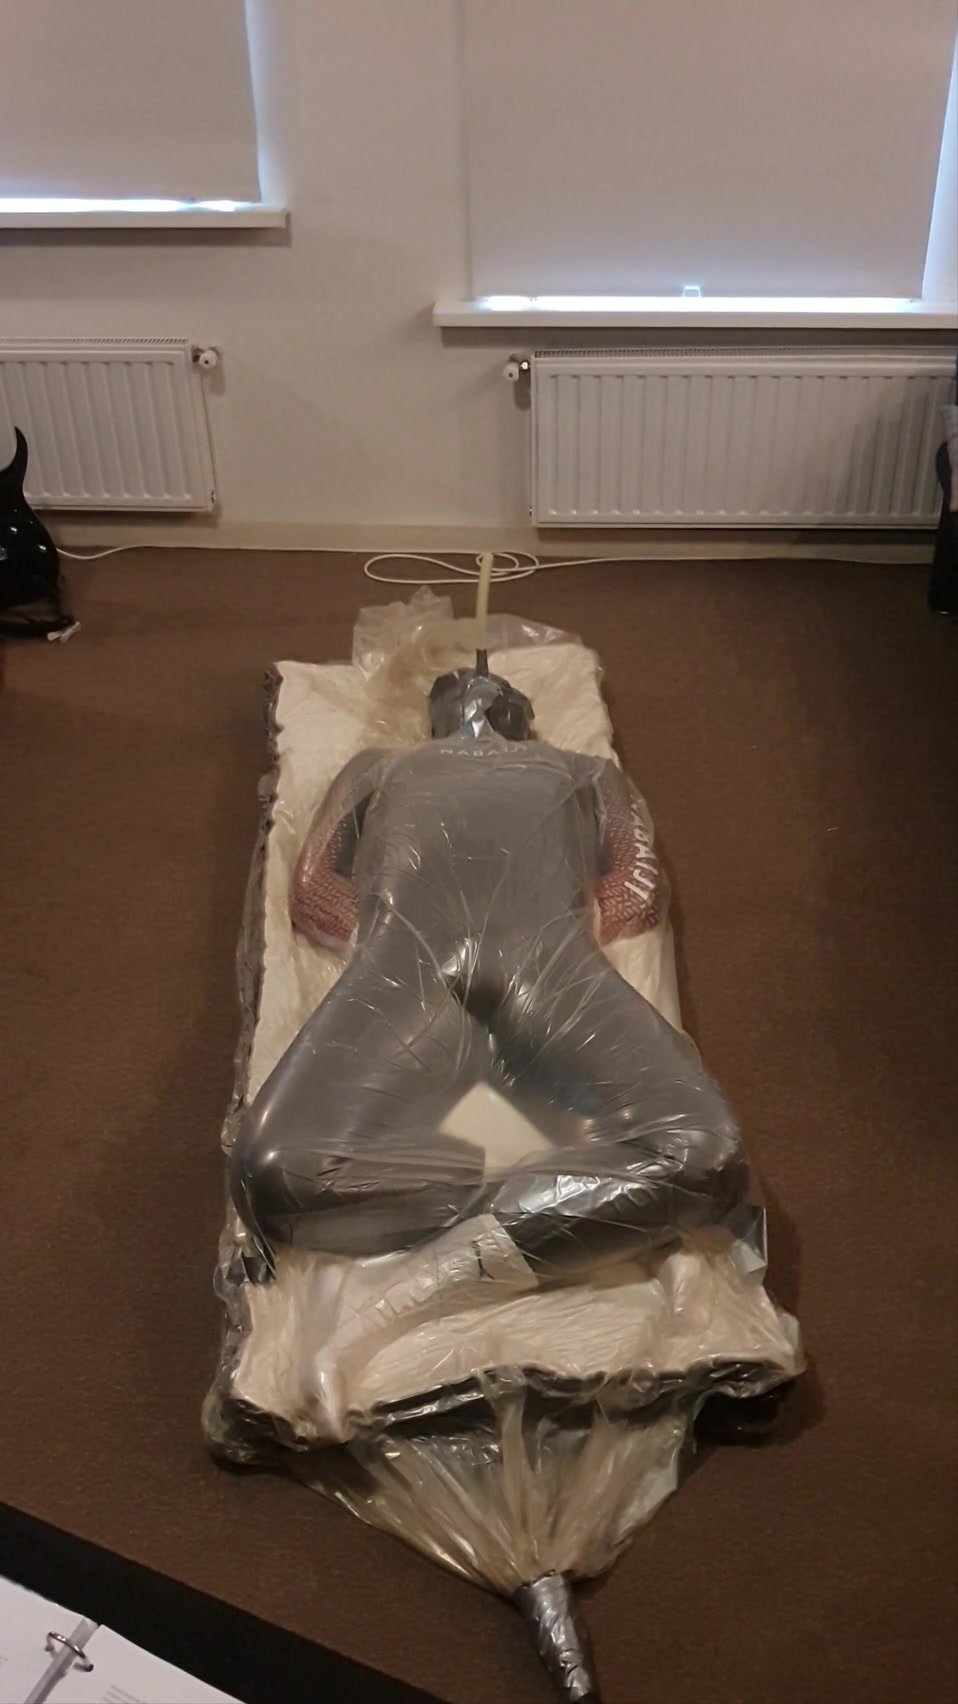 Vacbed 5 minutes session.